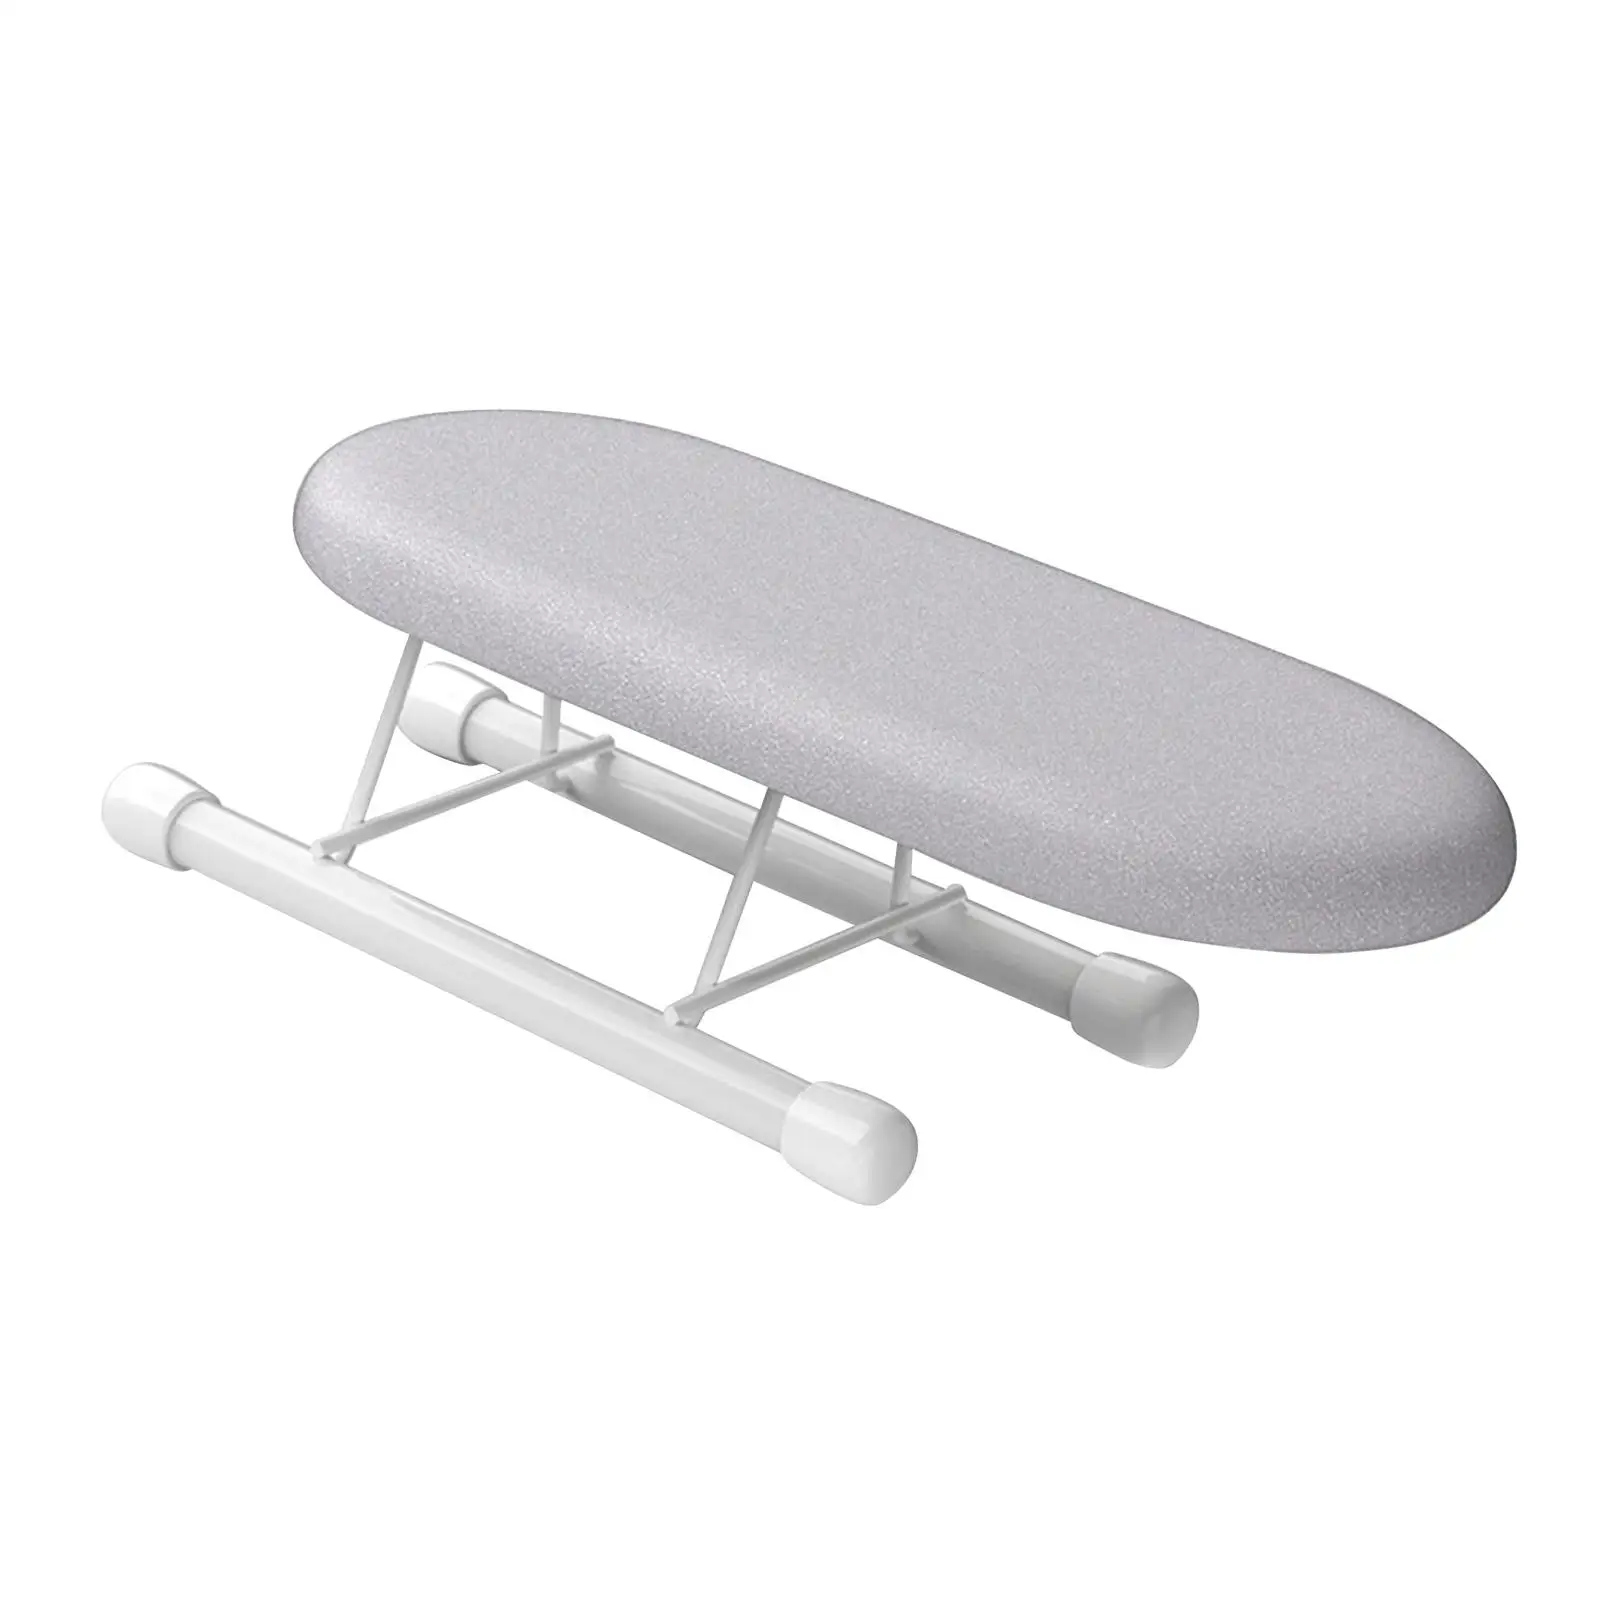 Small Folding Ironing Board Foldable Legs Removable Cover for Home Apartments Home